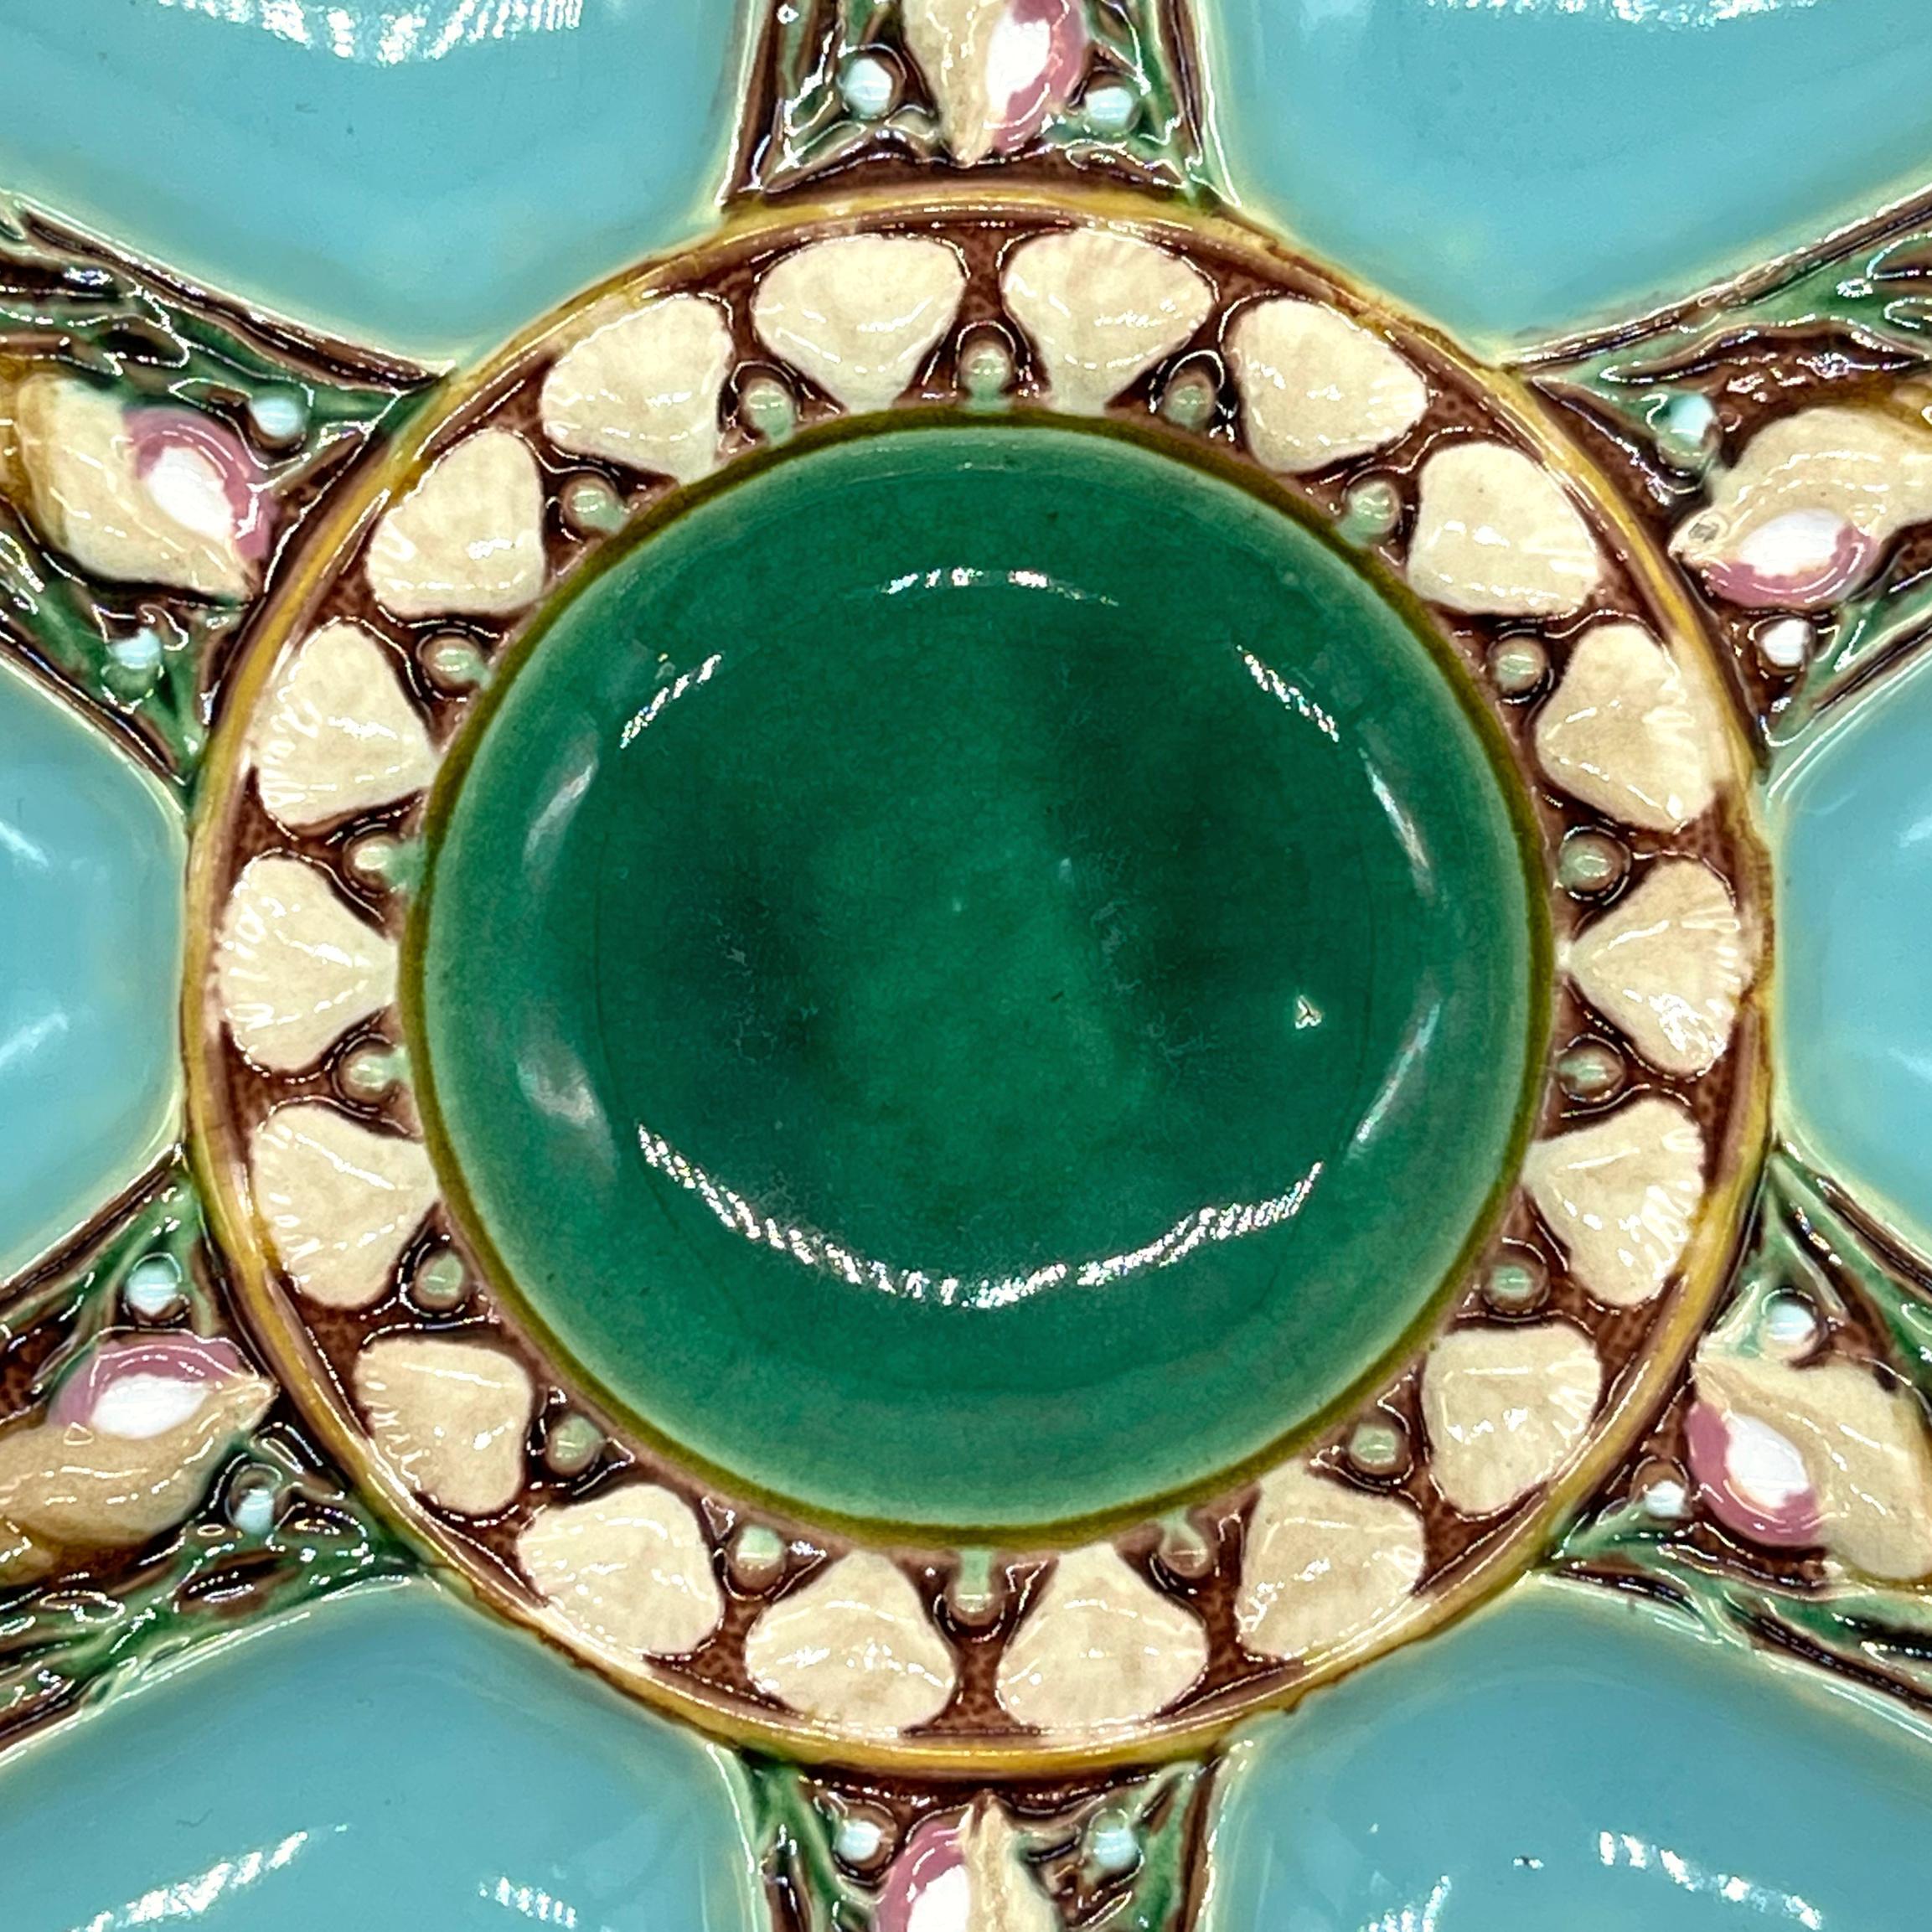 Molded Minton Majolica Turquoise-Ground Oyster Plate, Shells and Seaweed, Dated 1873